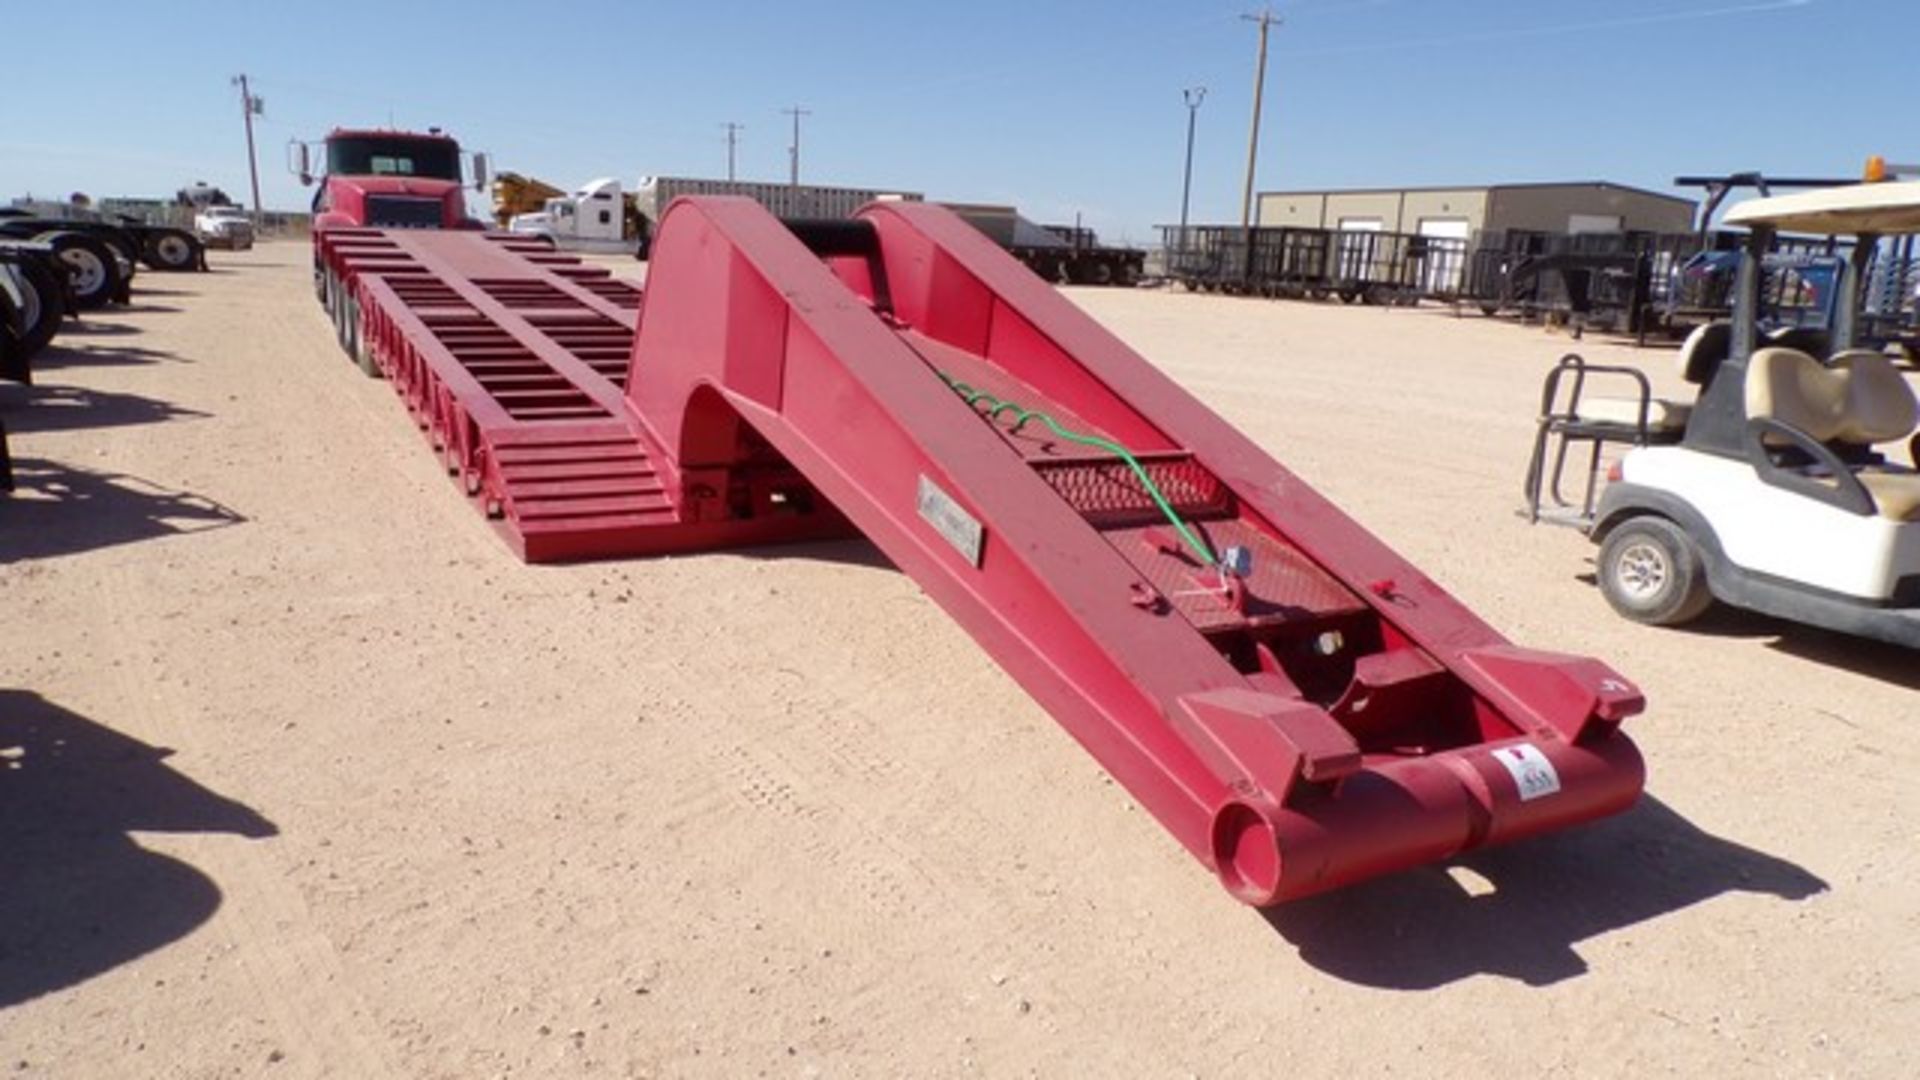 Located in YARD 1 - Midland, TX (6337) (X) 1982 HERCULES 40' 4 AXLE MANUAL RGN LOWBOY TRAILER, - Image 2 of 5